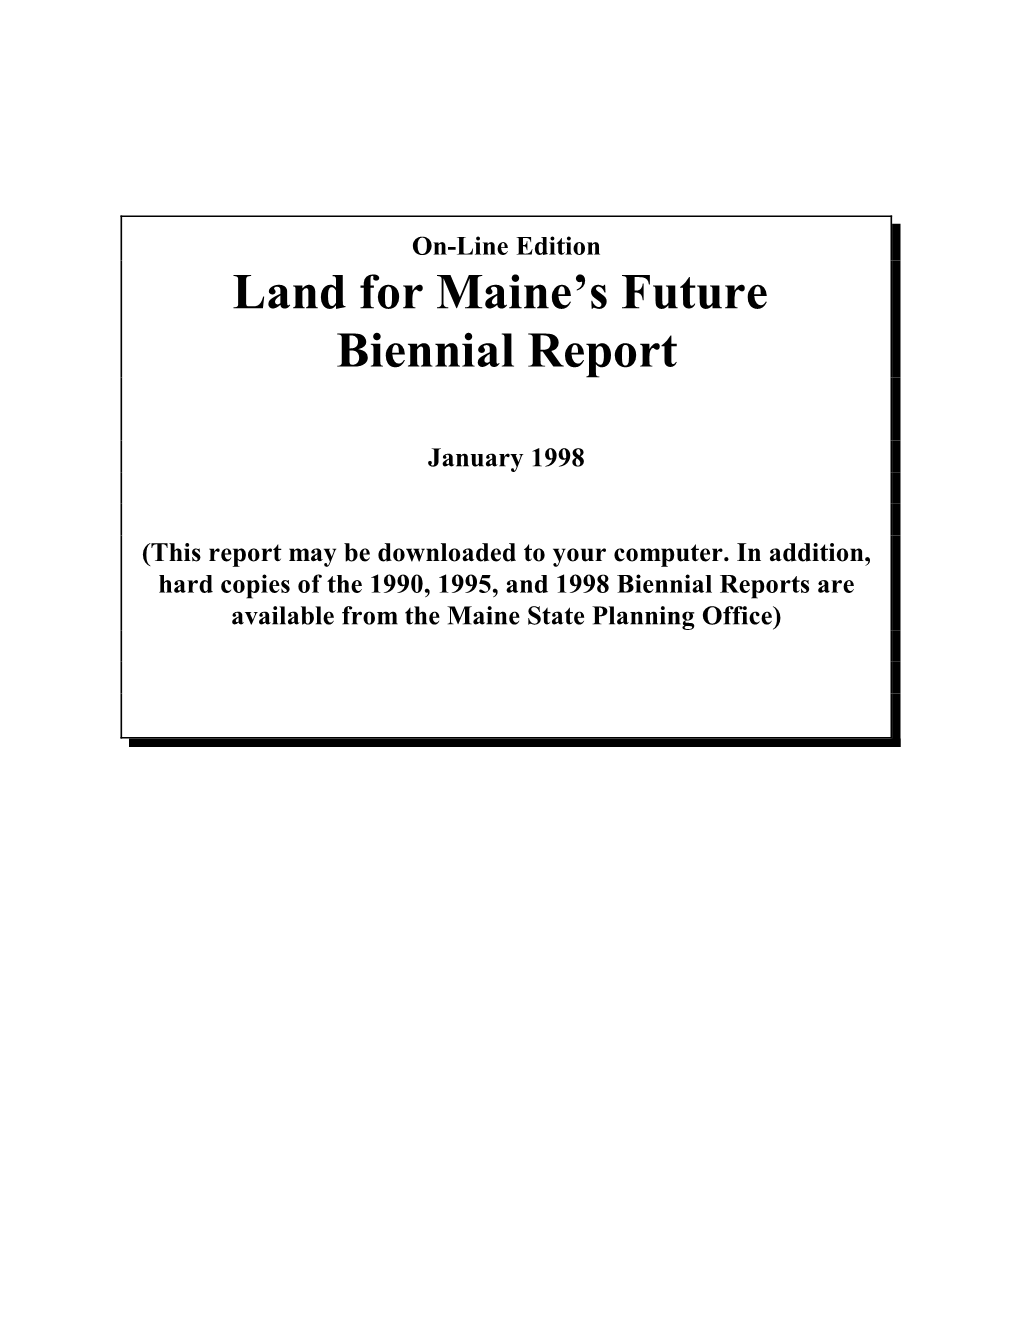 1998 Biennial Reports Are Available from the Maine State Planning Office) LAND for MAINE’S FUTURE BOARD